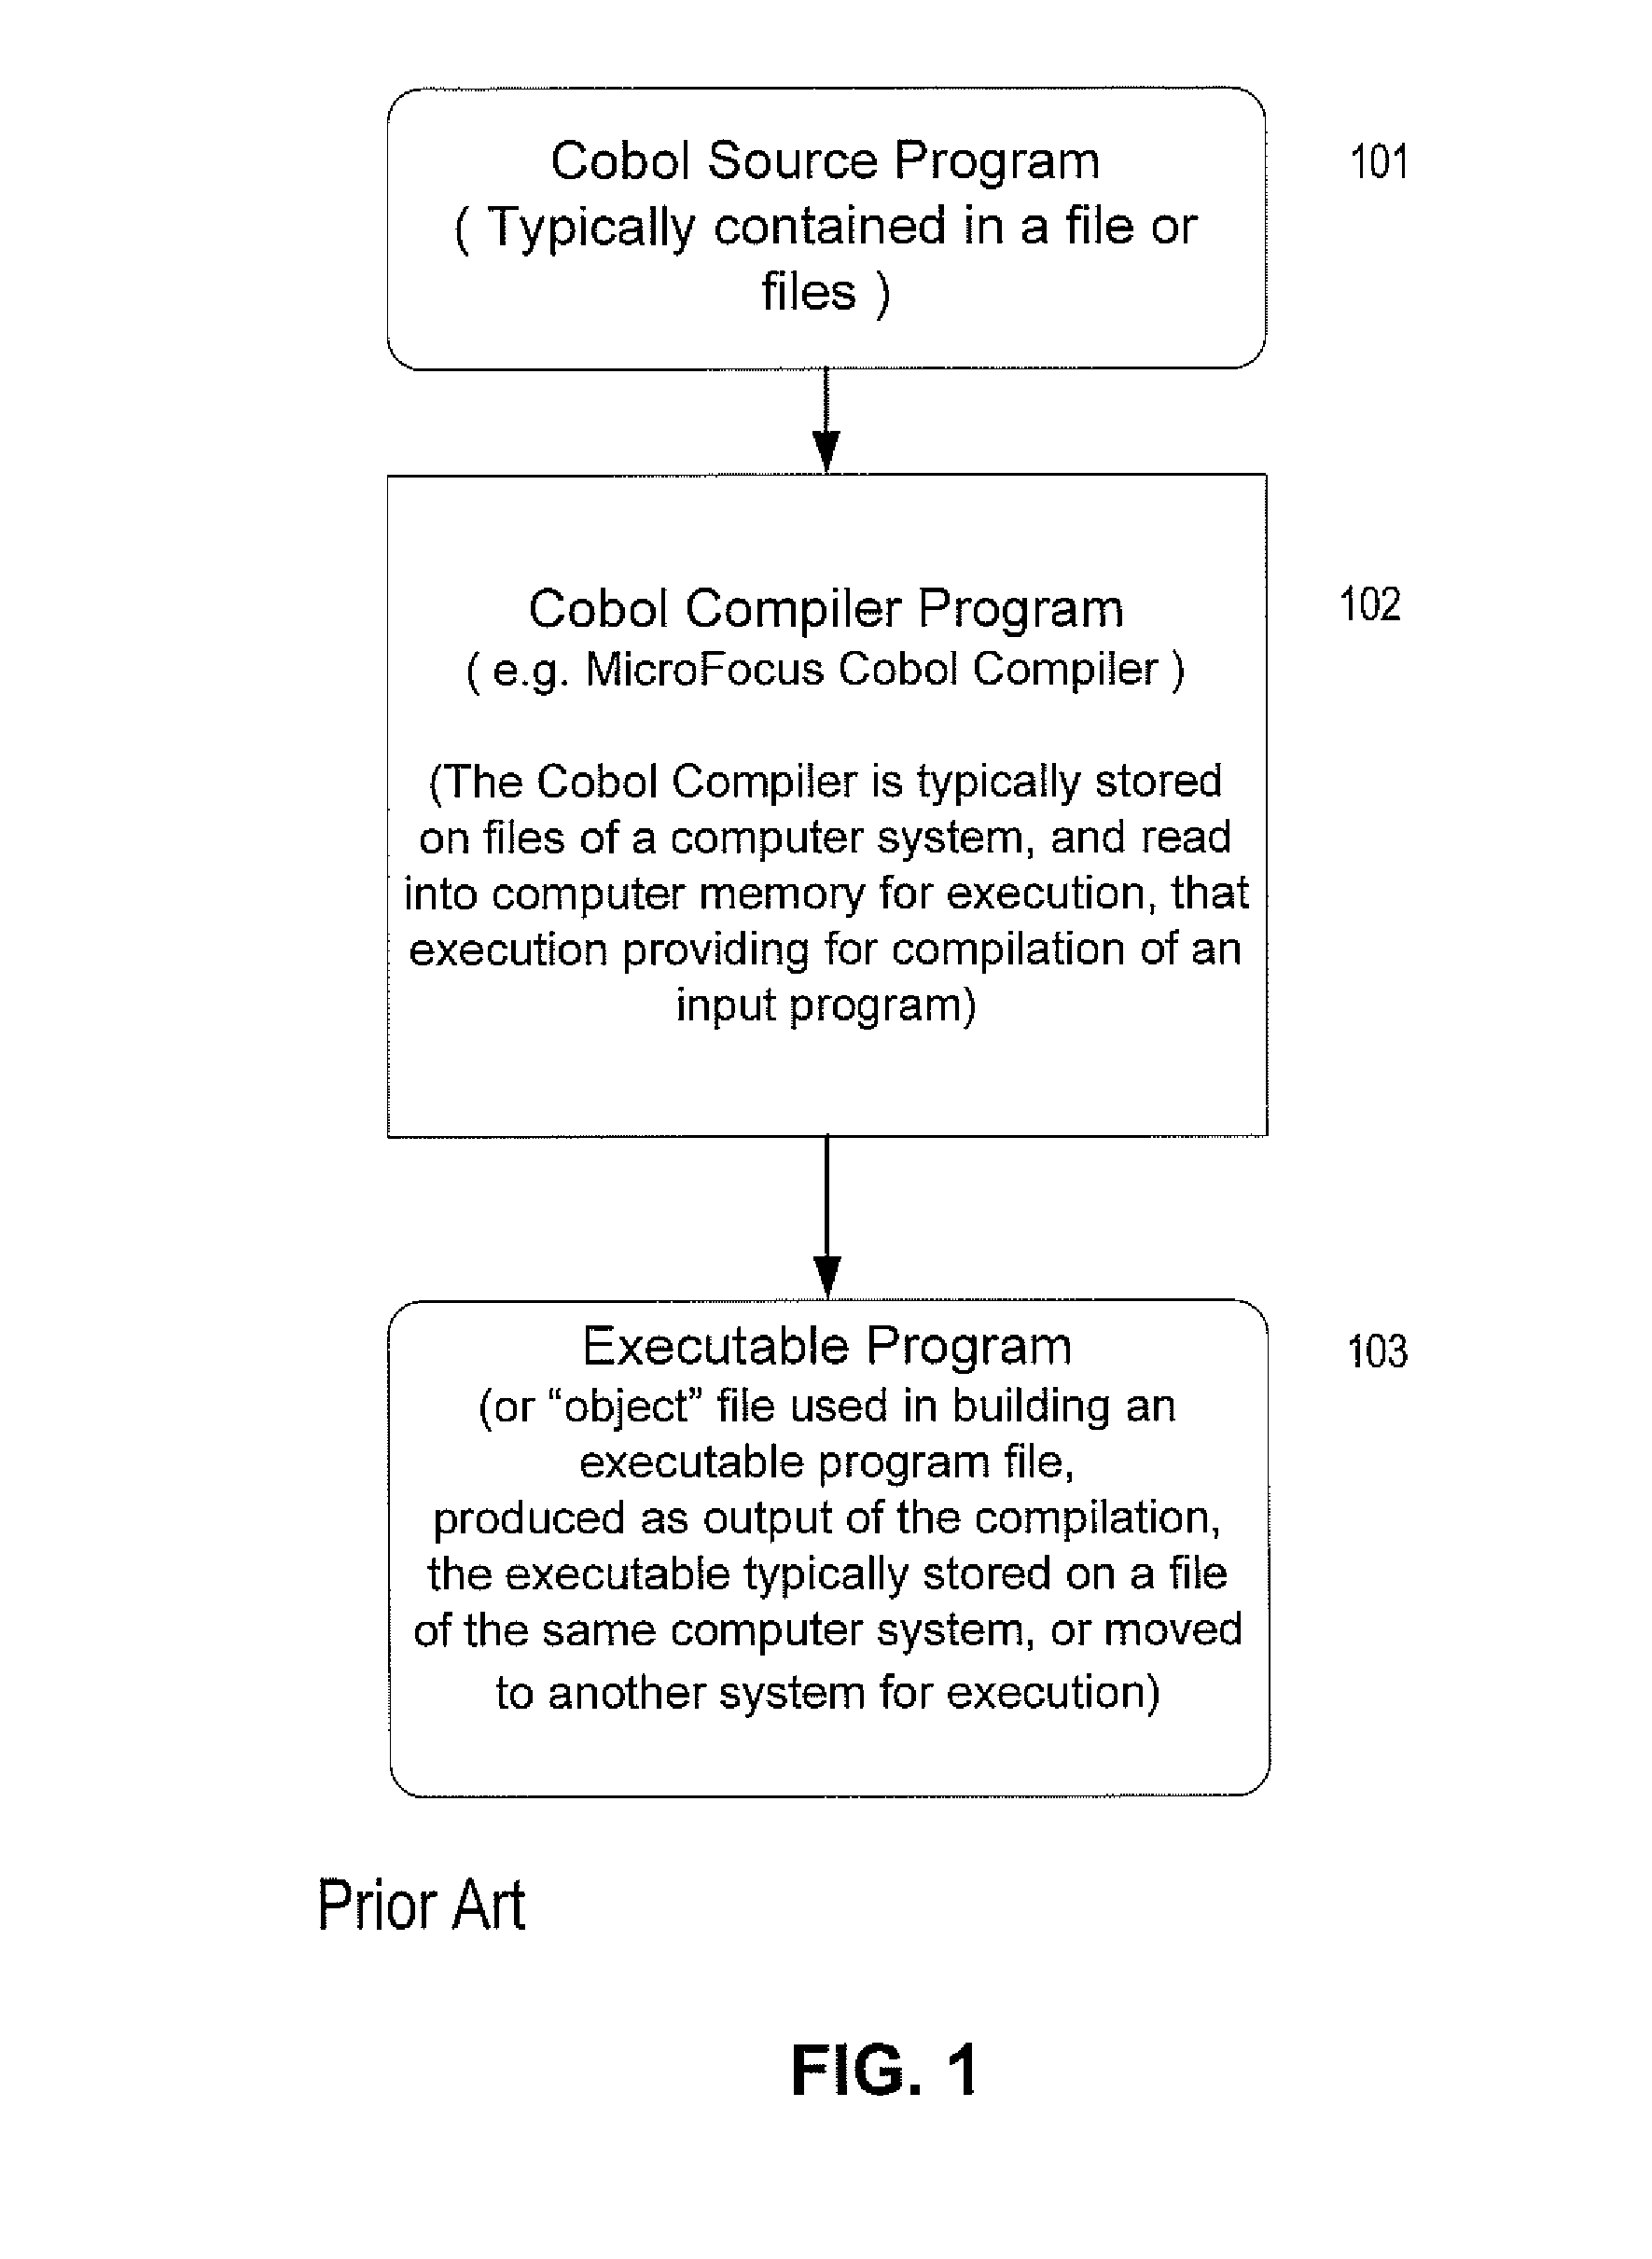 Method and apparatus enabling multi threaded program execution for a cobol program including openmp directives by utilizing a two-stage compilation process